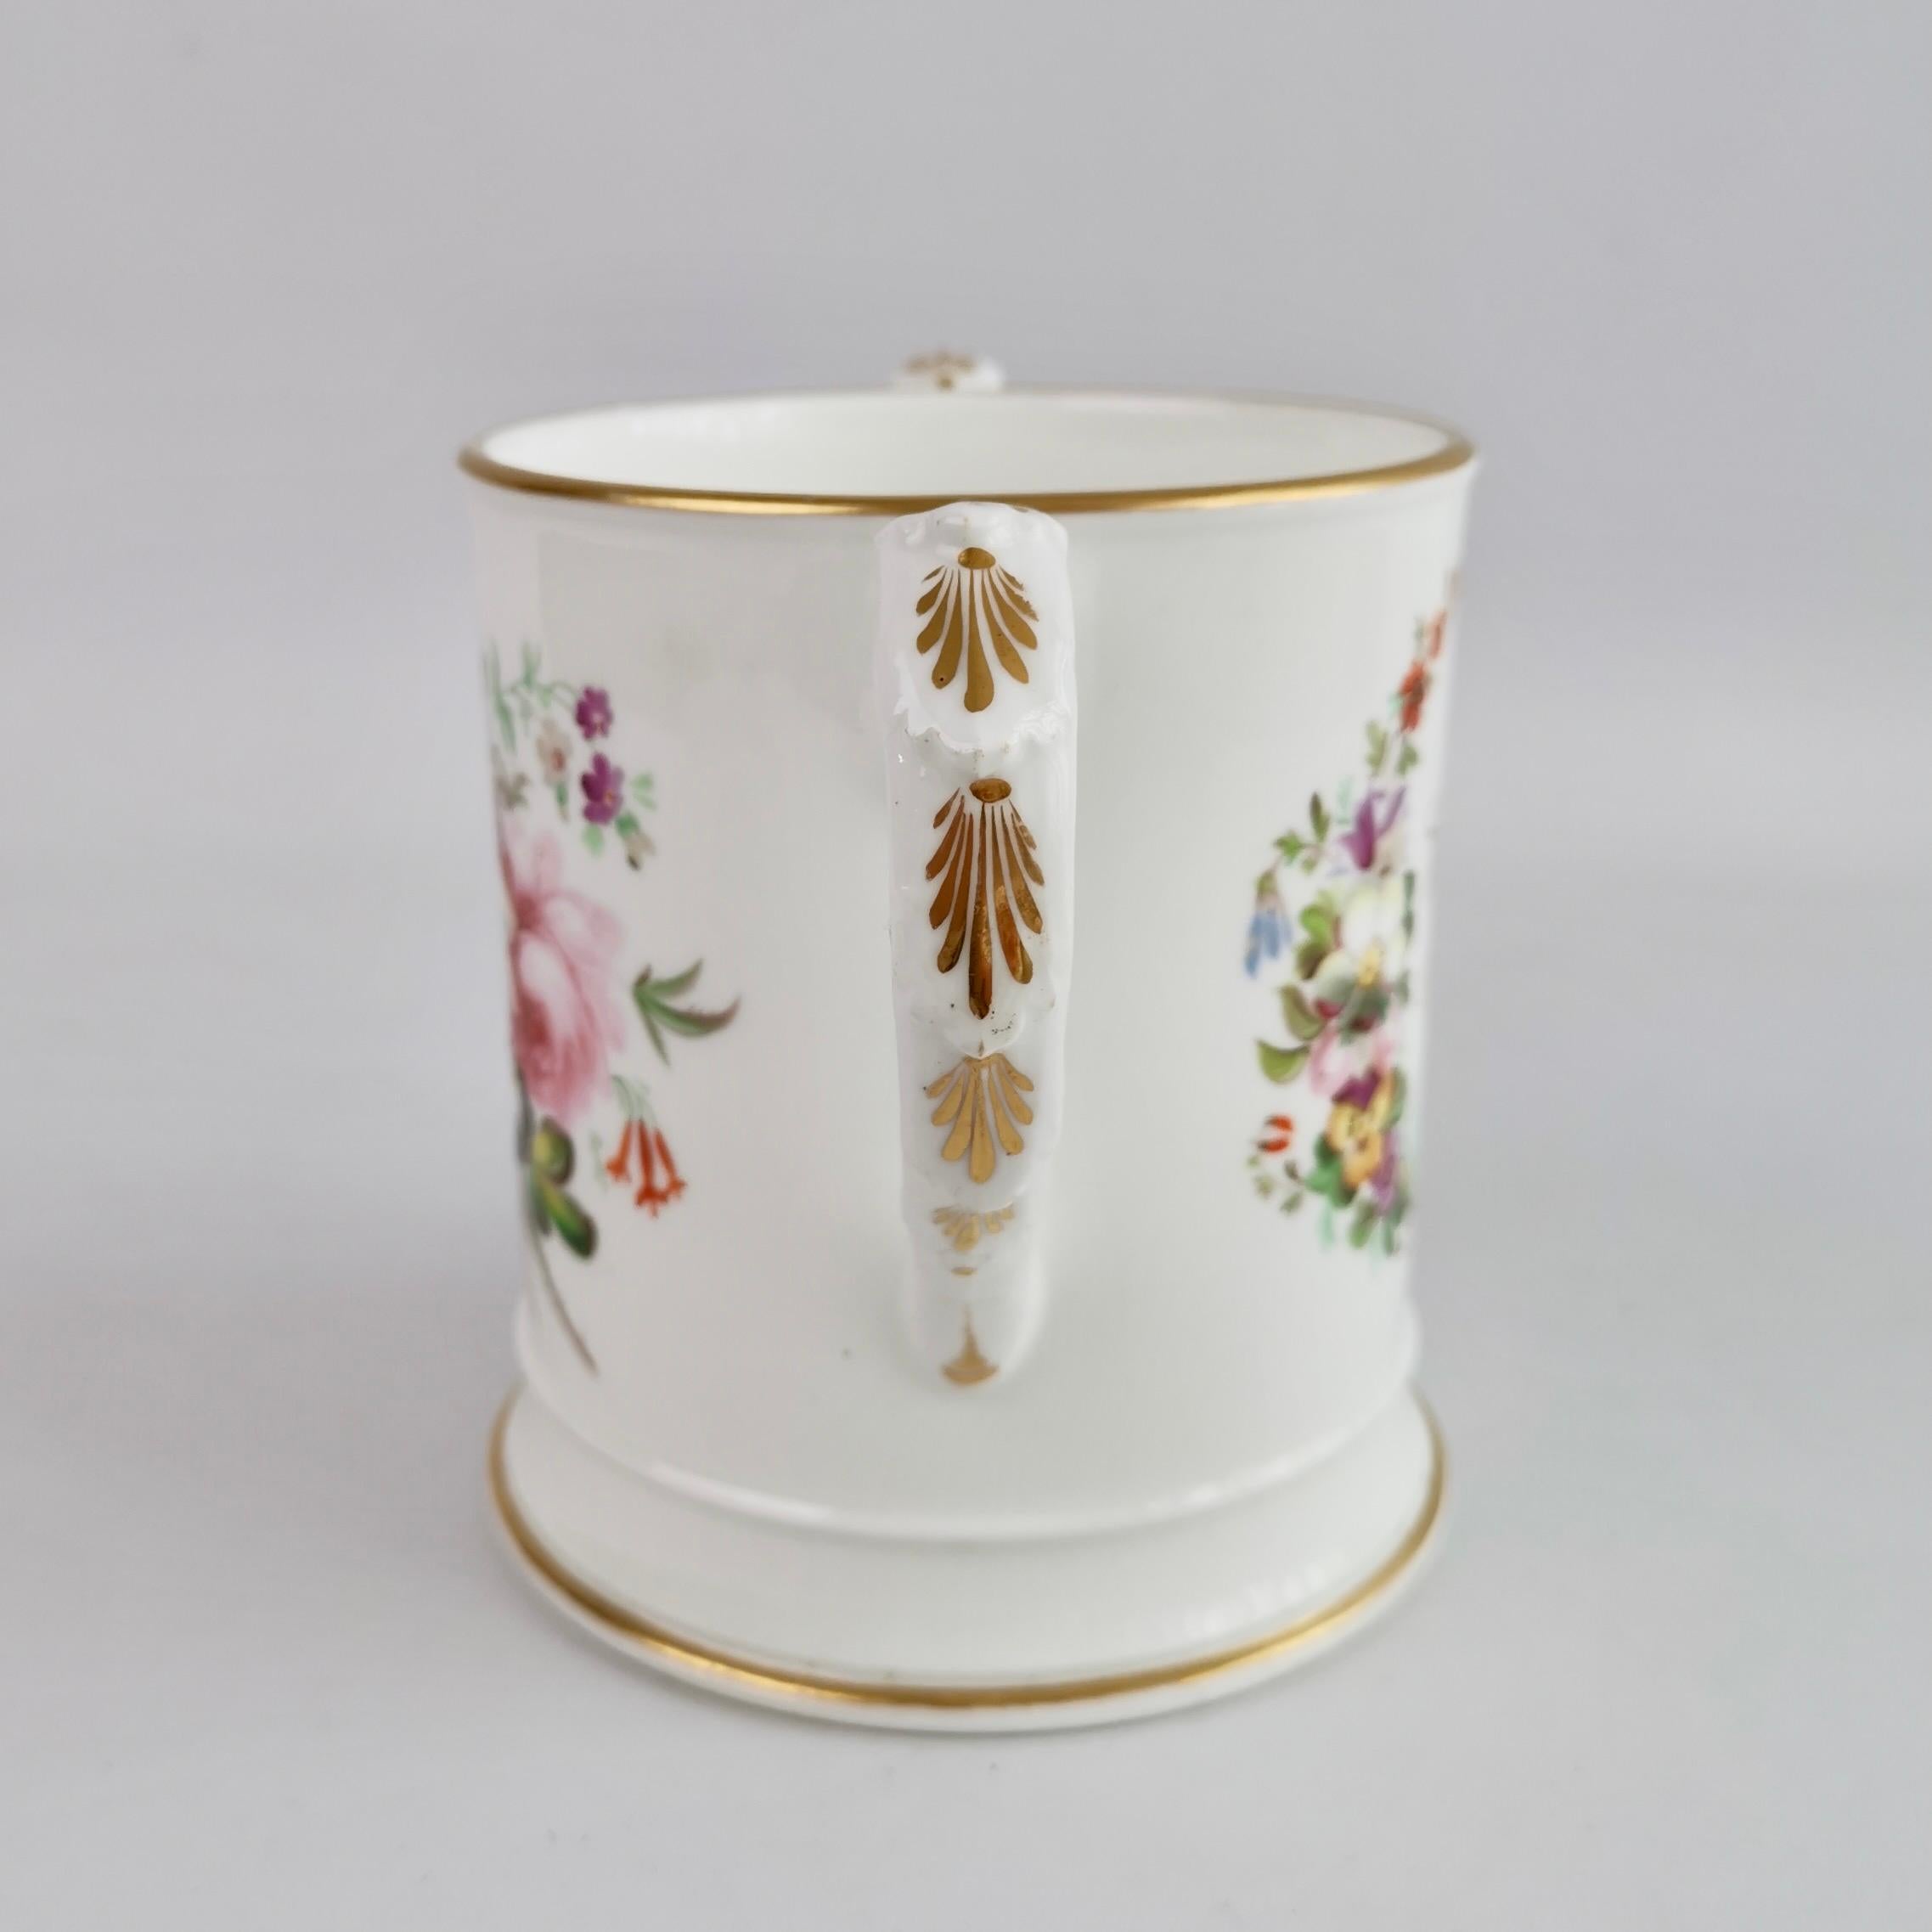 This is a huge porter mug made by Coalport in about 1845. The mug has a white ground and beautiful flowers painted by the famous painter Thomas Dixon, and in gilt font: 